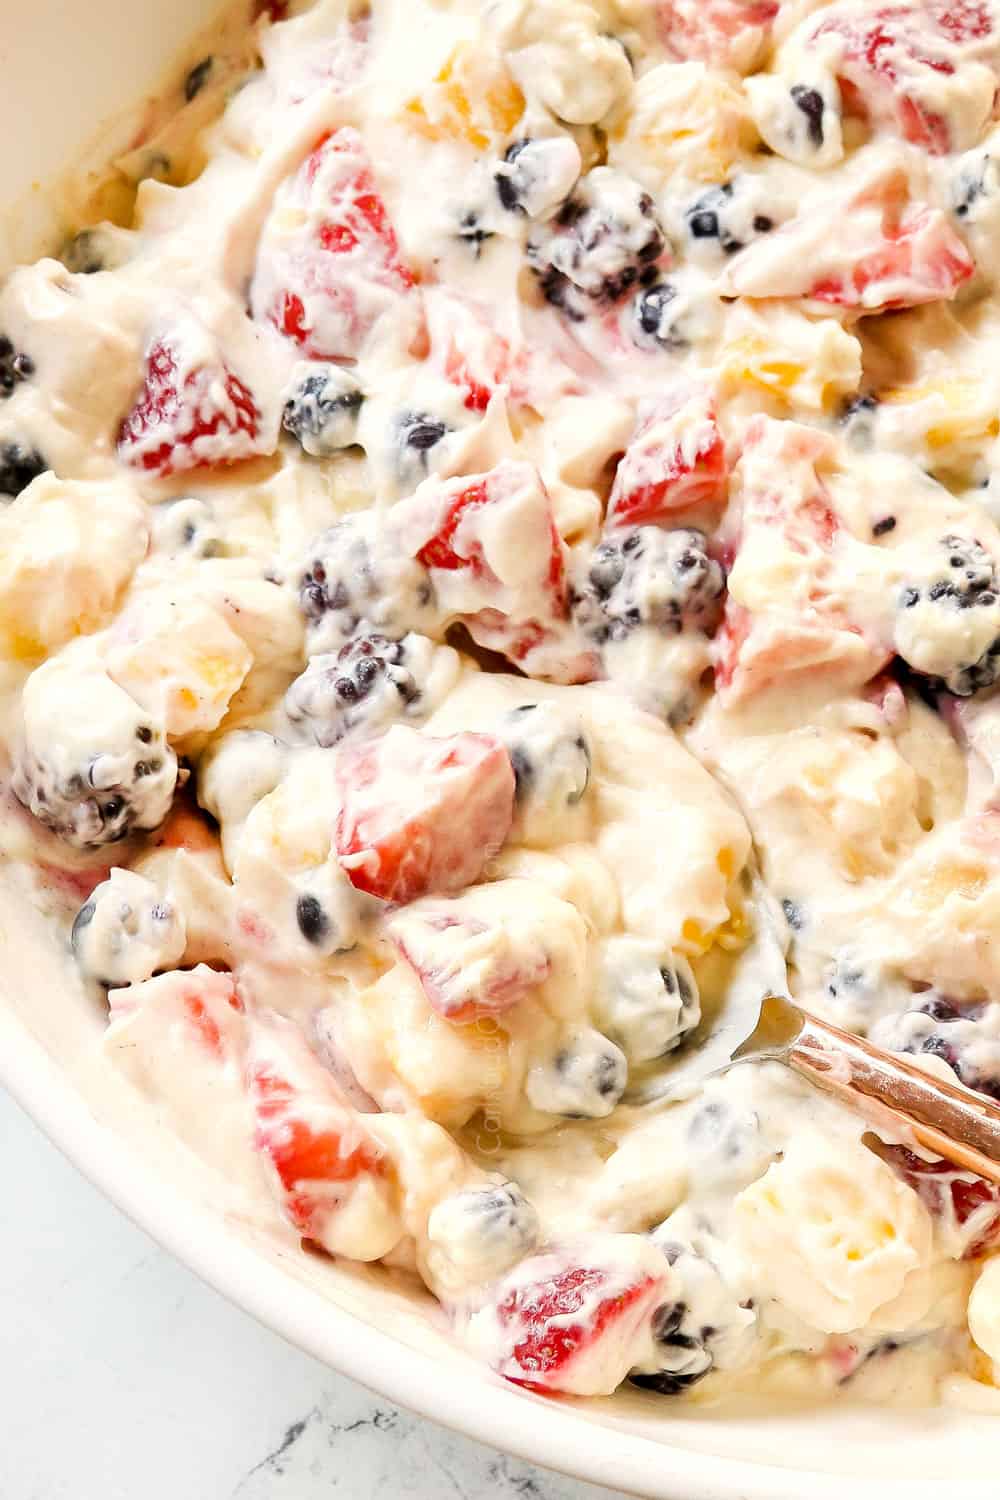 up close of serving cheesecake salad by scooping it with a spoon